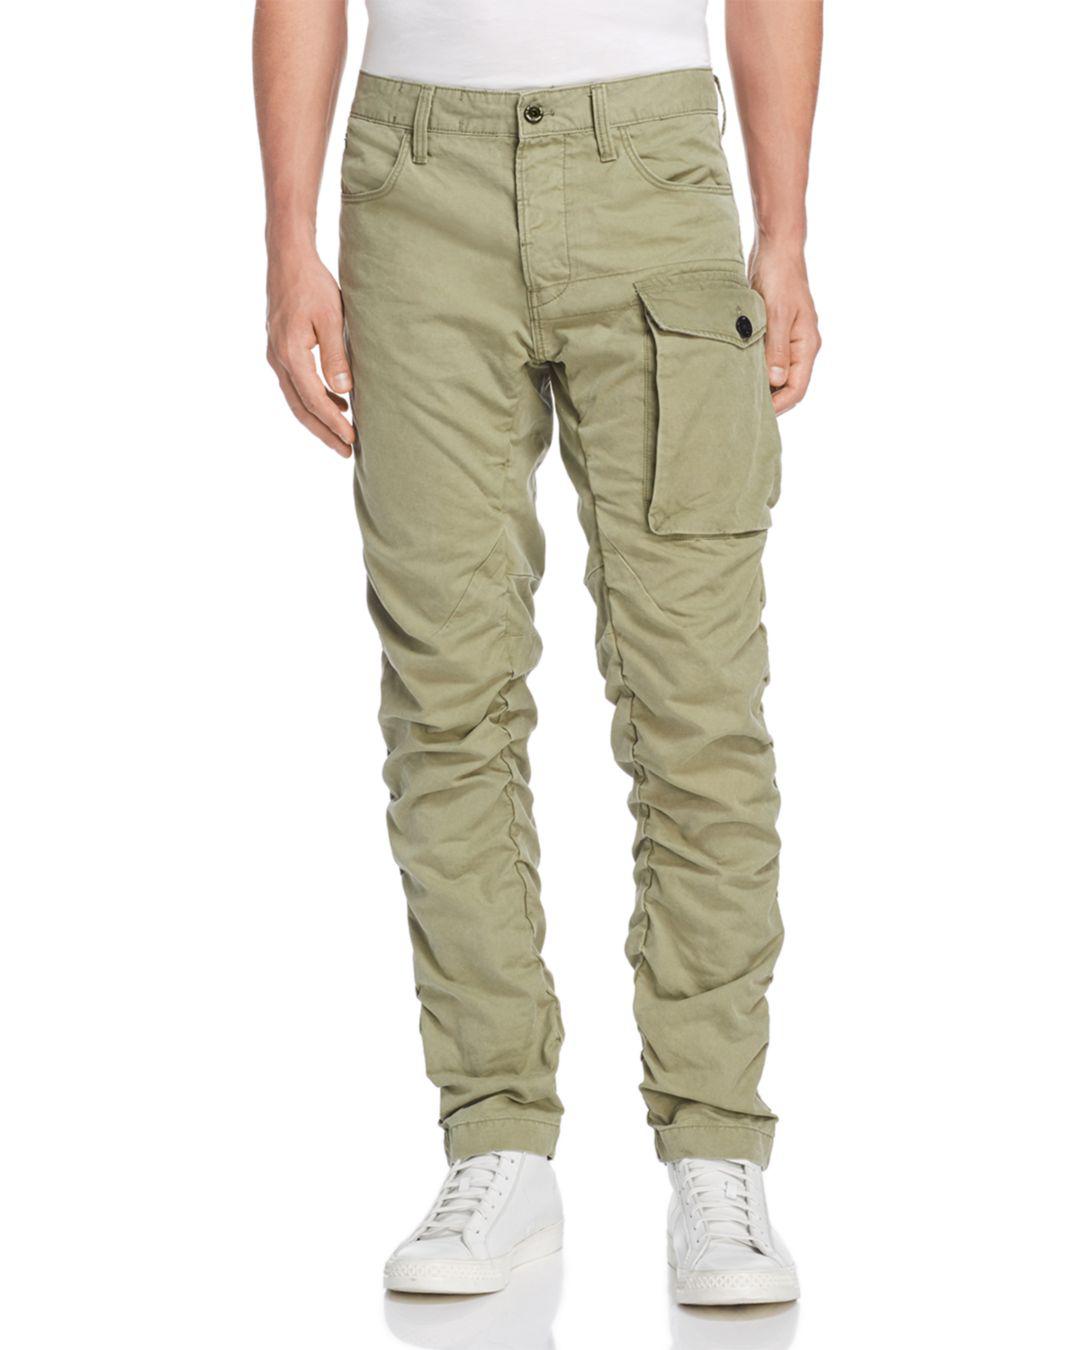 G-Star RAW Tendric 3d Tapered Fit Cargo Pants in Sage (Green) for Men ...